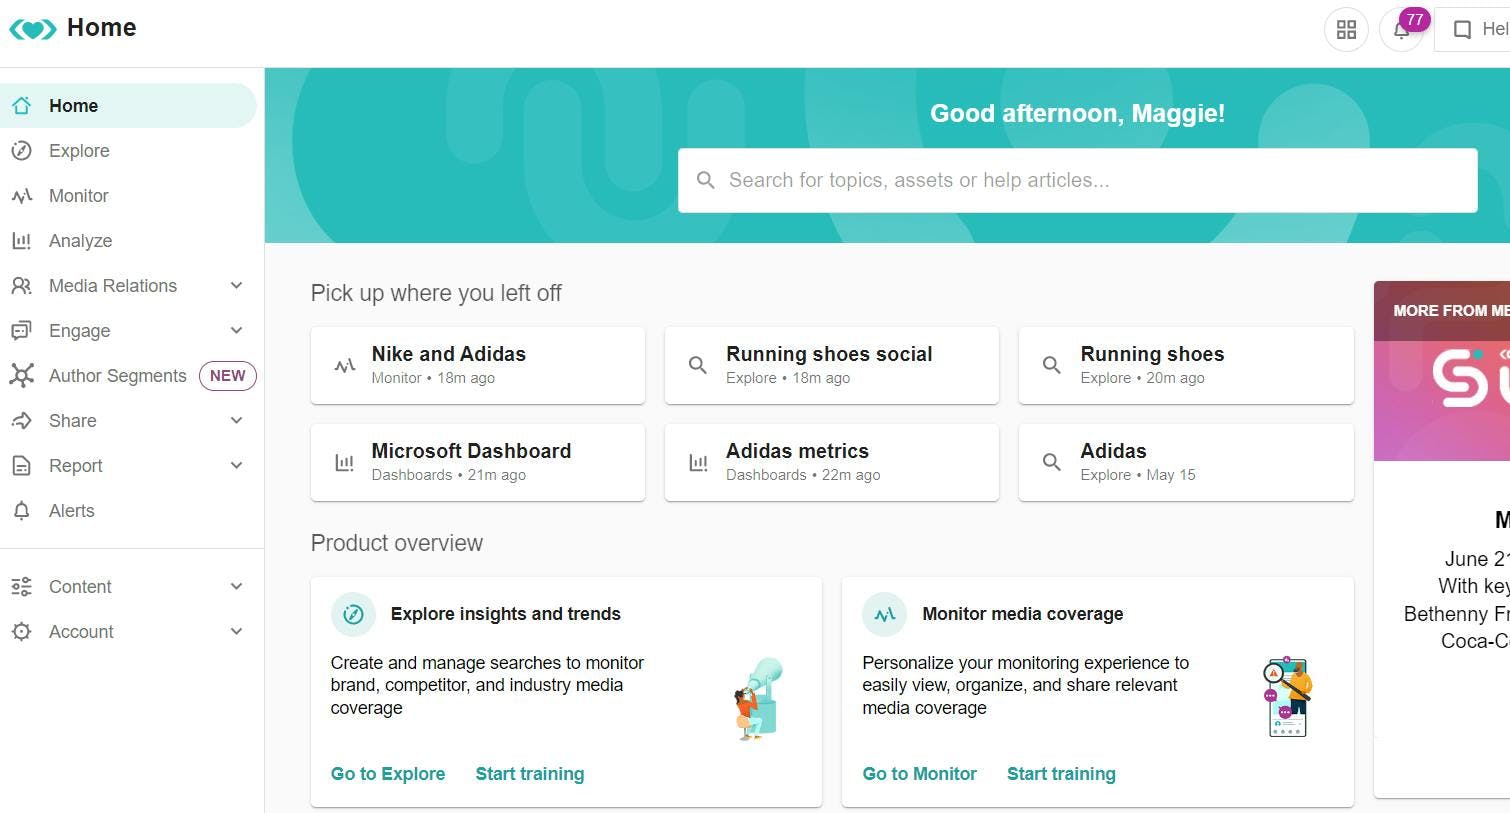 Meltwater "Pick up where you left off" Homepage View